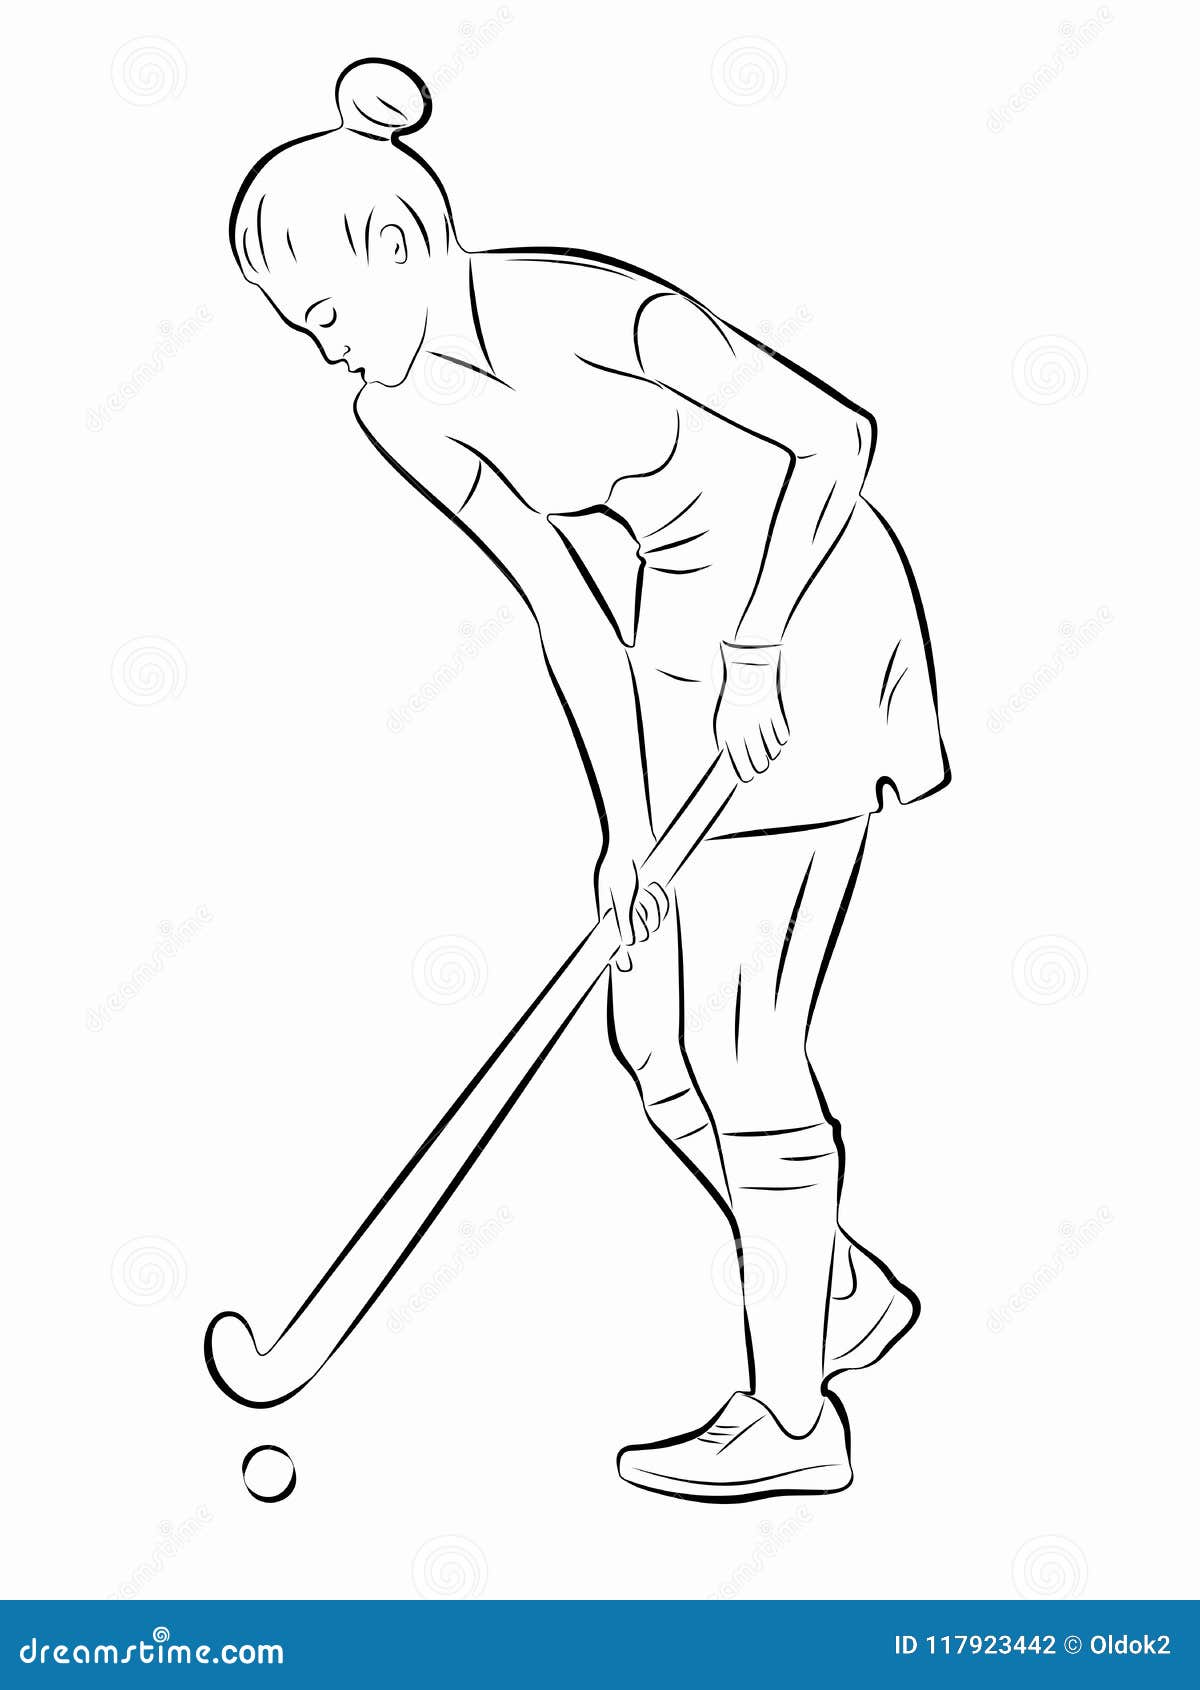 Illustration of a Field Hockey Player, Vector Draw Stock Vector